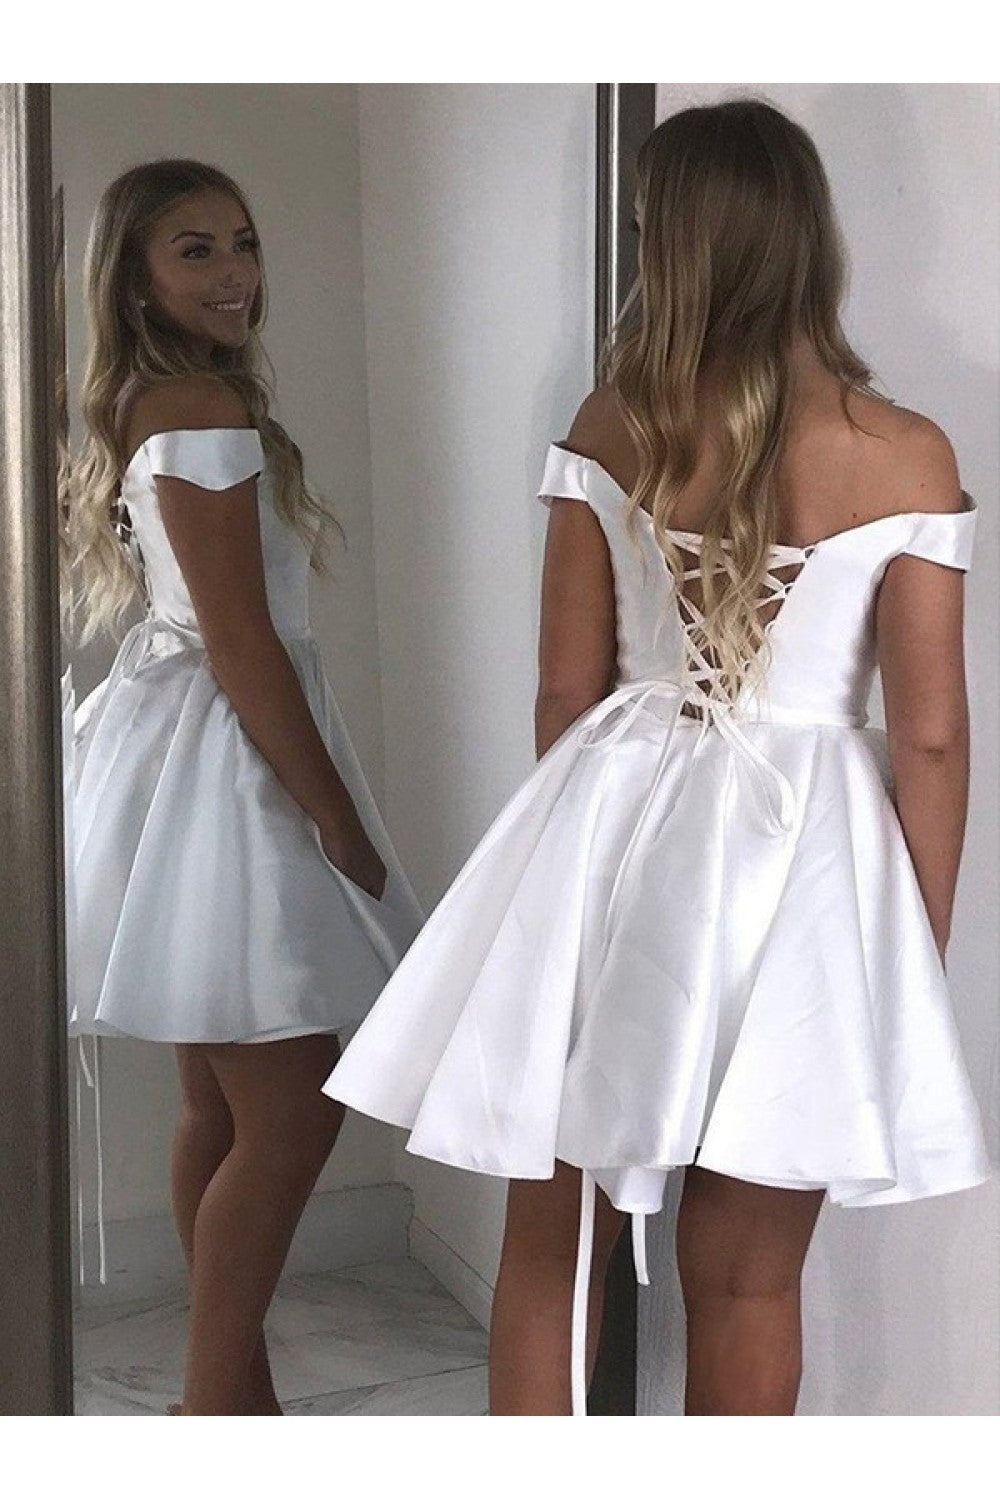 White Homecoming Dress, Short Prom Dresses, Evening Dress ,Winter Formal Dress, Pageant Dance Dresses, Back To School Party Gown, PC0601 - Promcoming